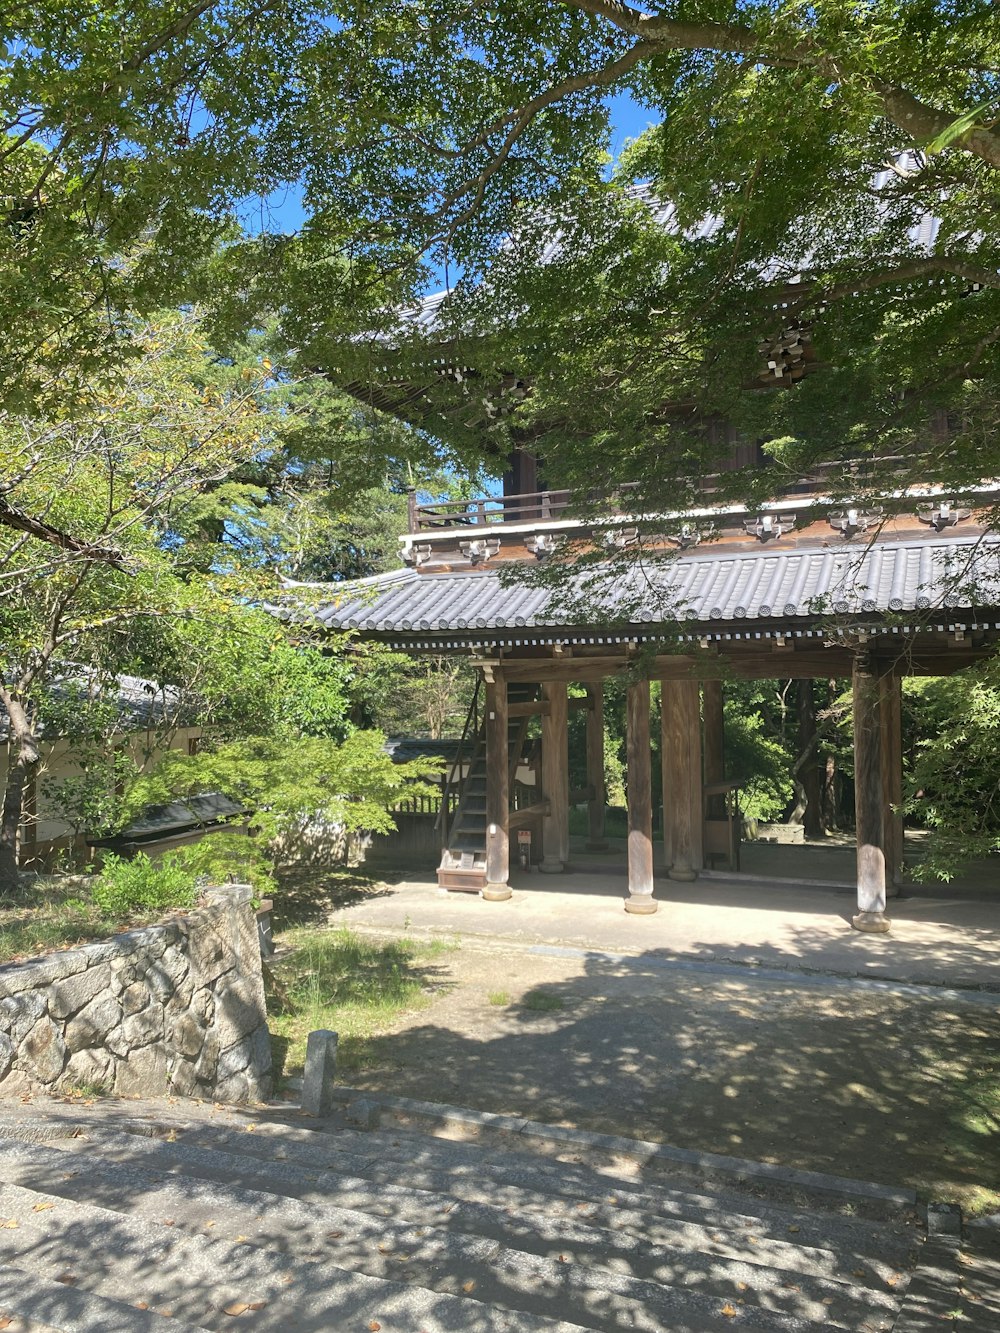 a stone walkway leading to a pavilion surrounded by trees